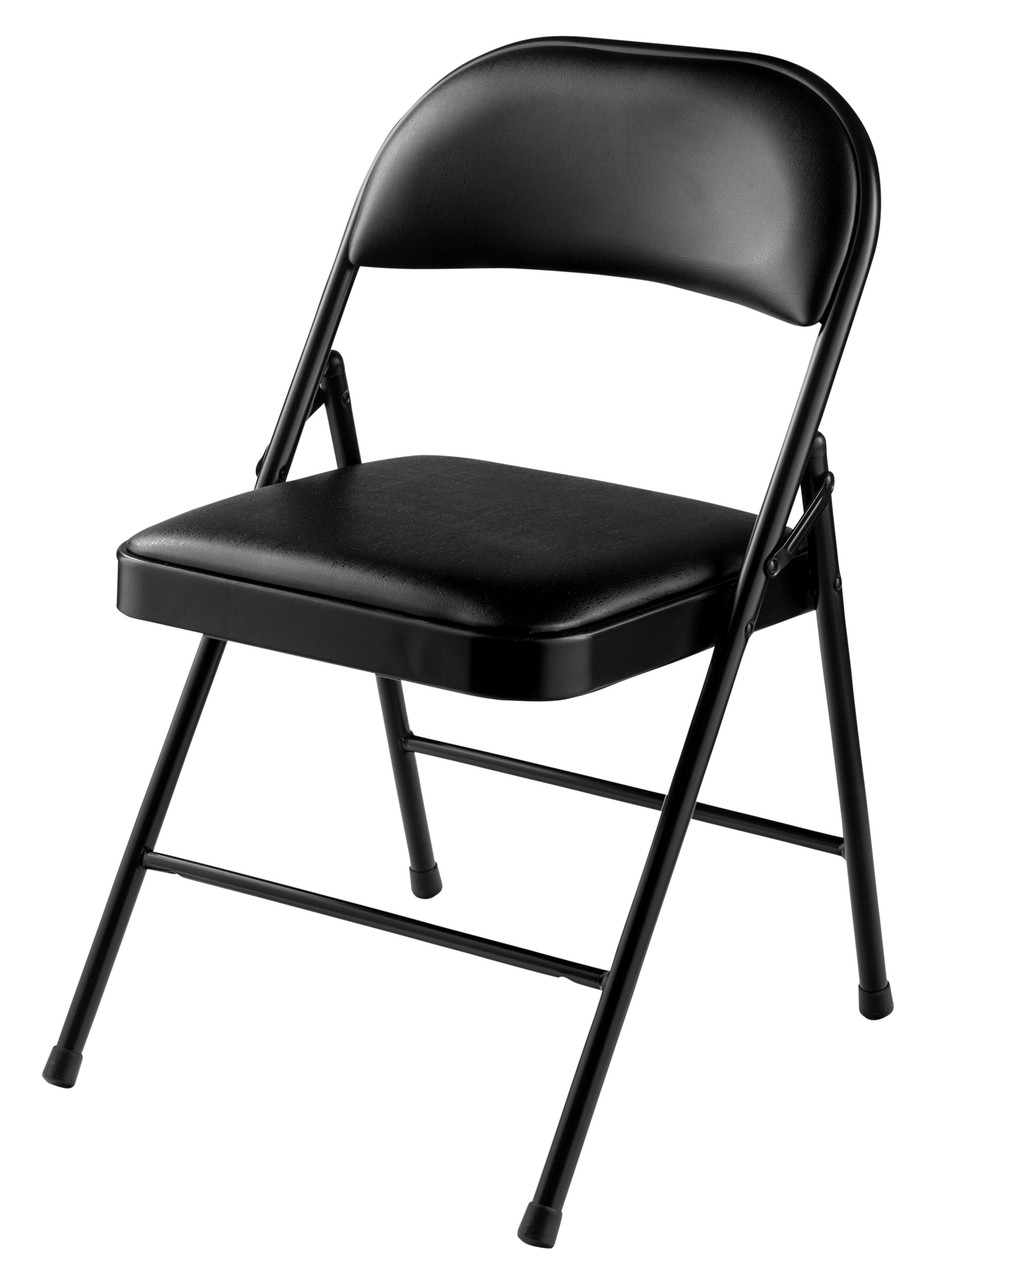 Commercialine Vinyl Padded Folding Chair By National ...